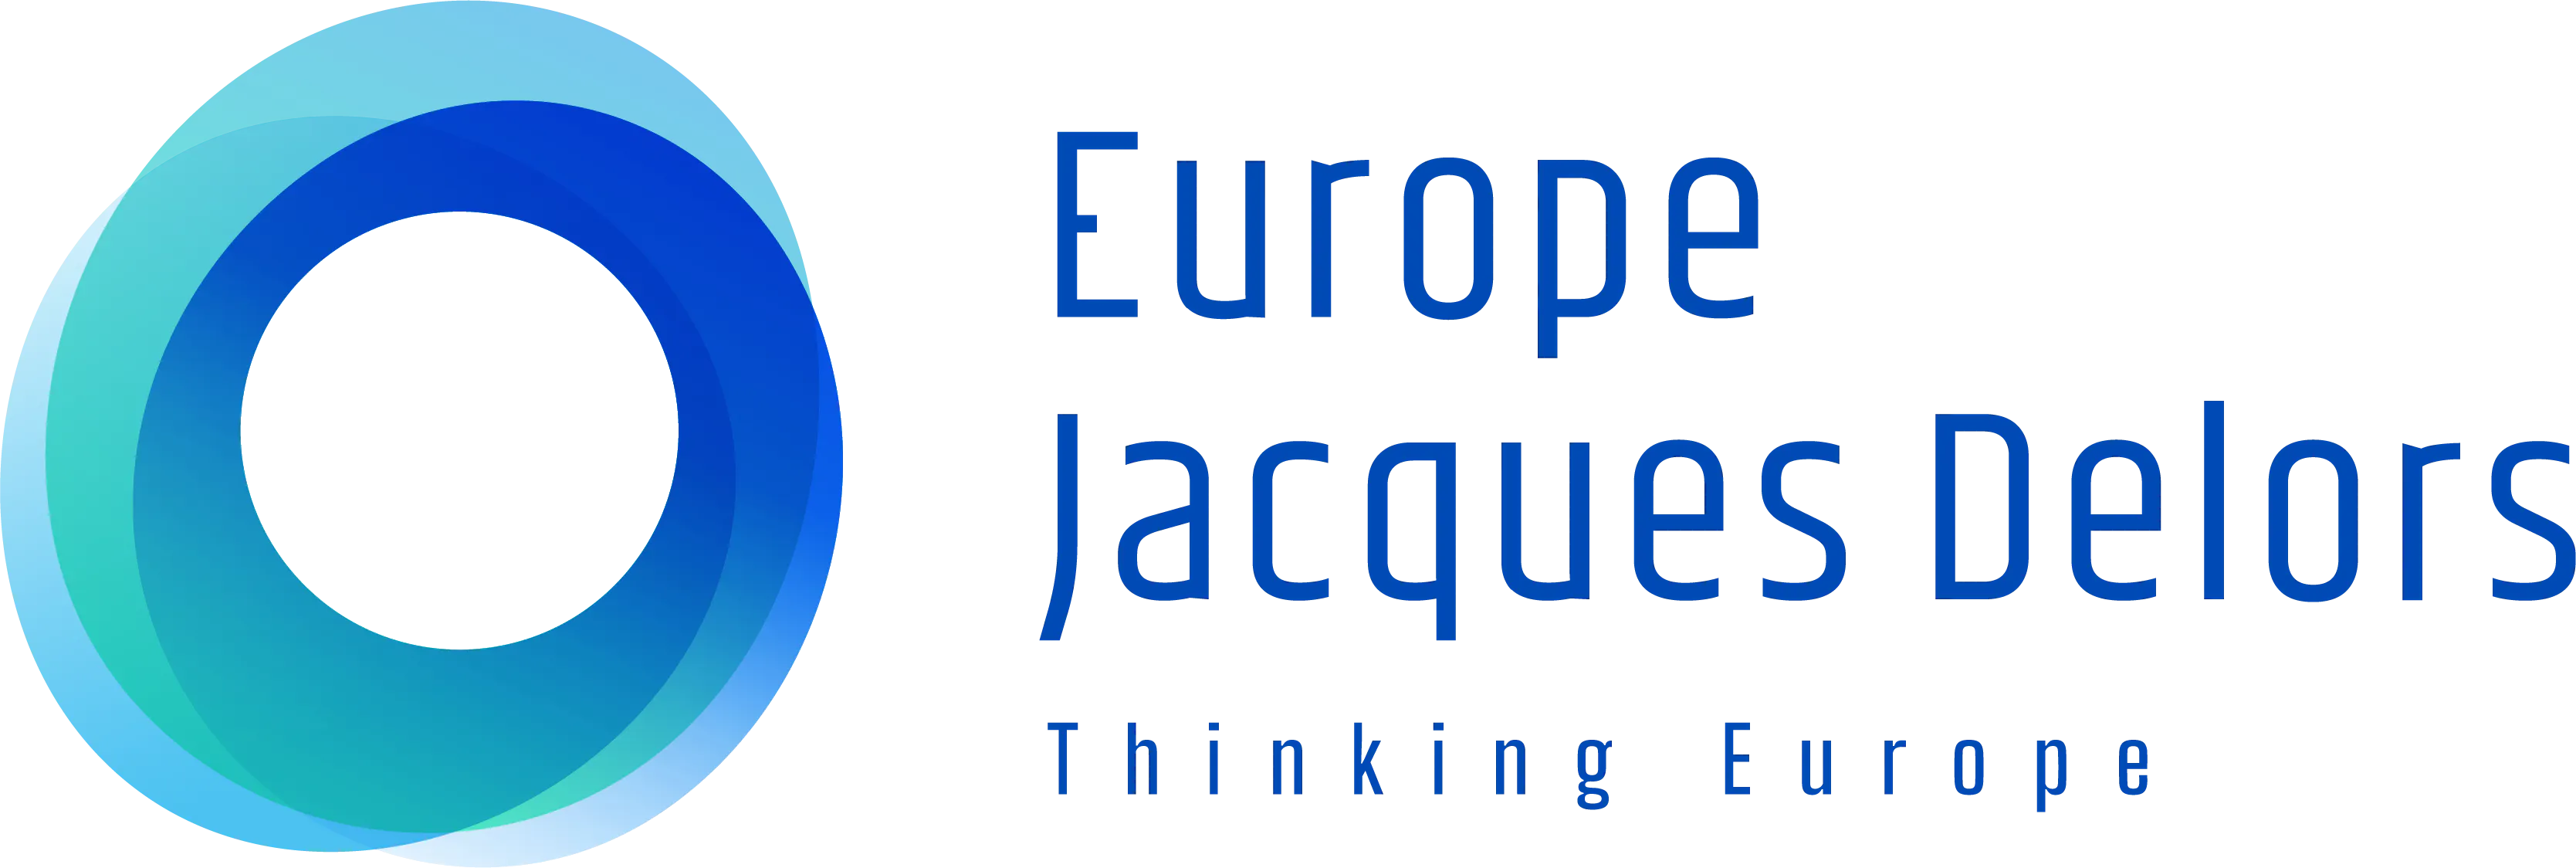 Europe Jacques Delors - Thinking Europe